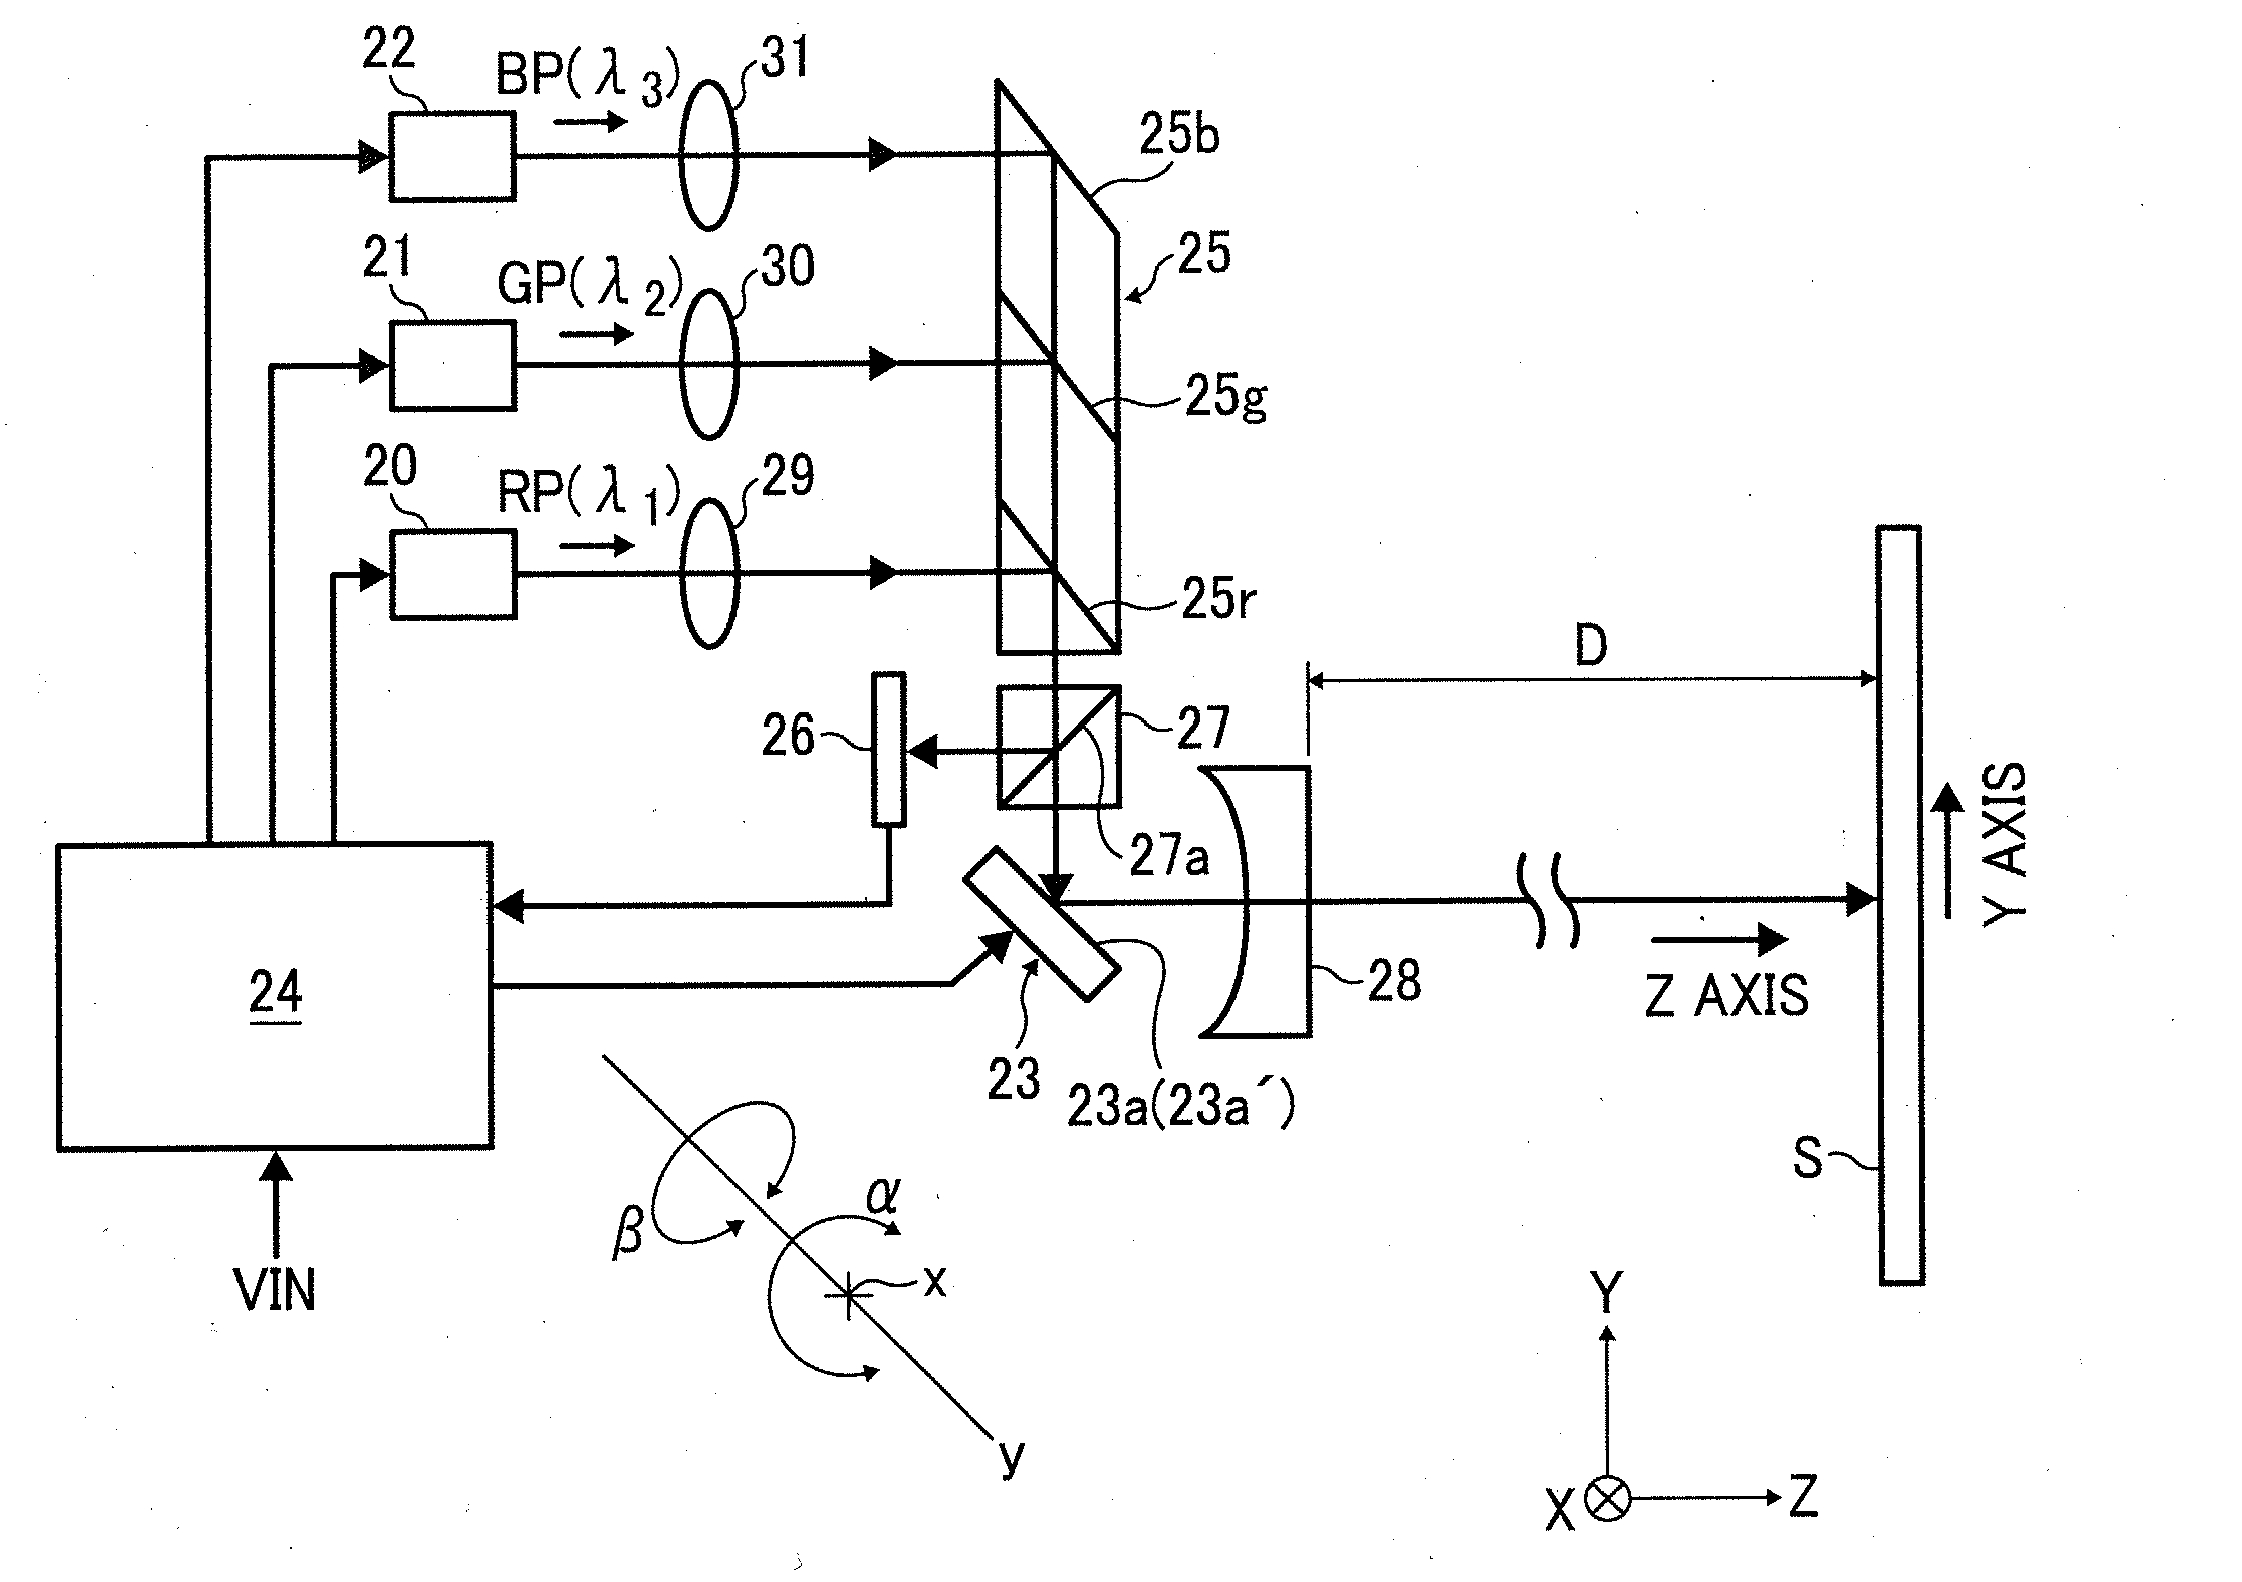 Projection-type image displaying apparatus